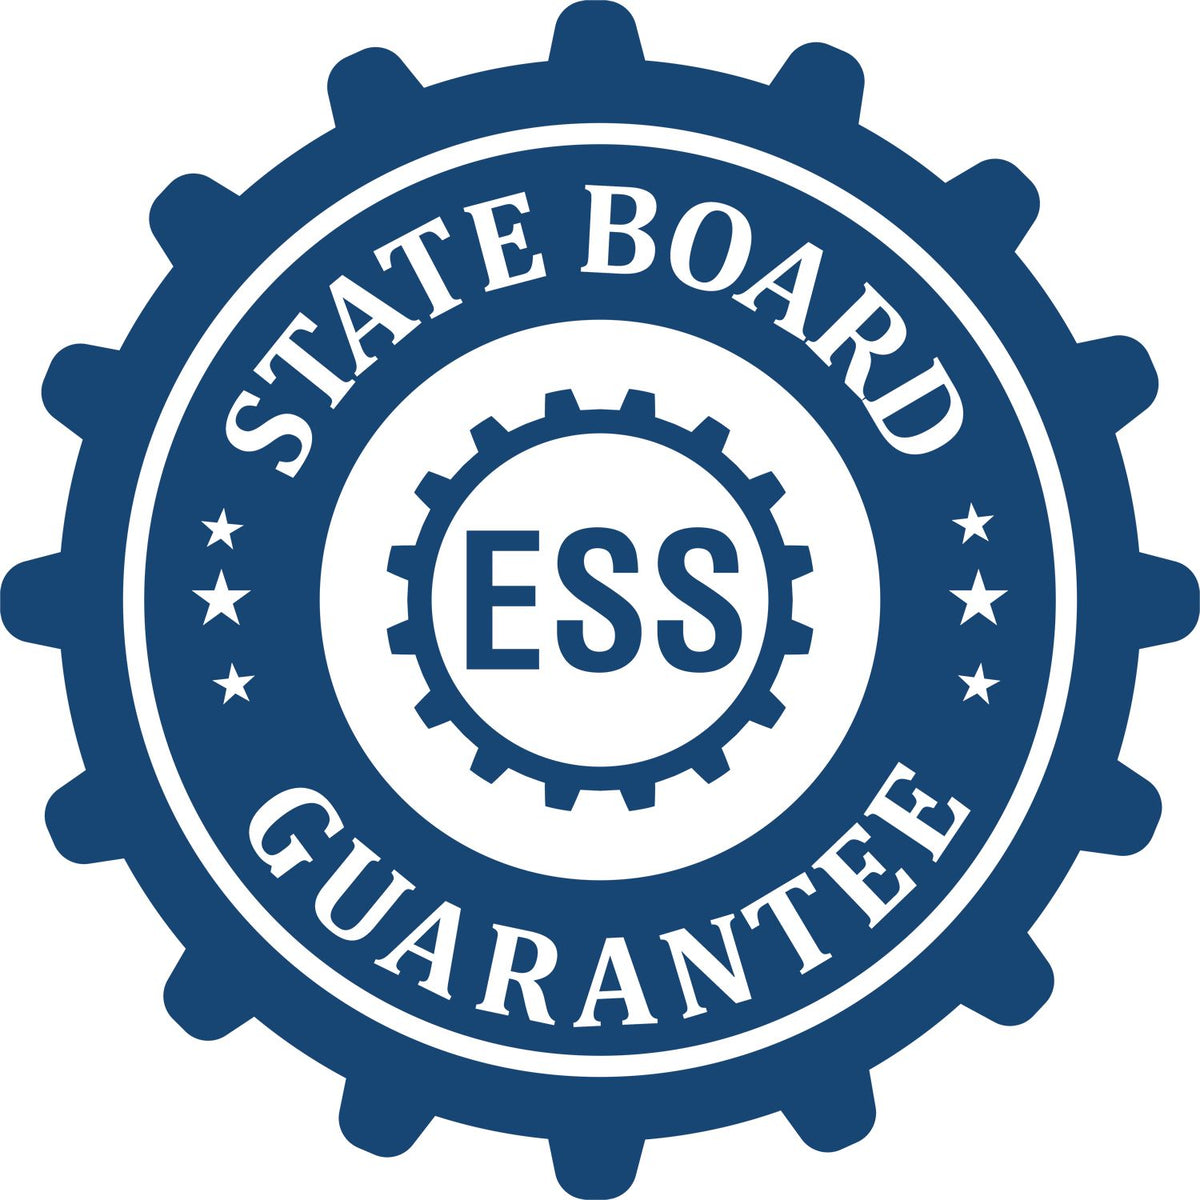 An emblem in a gear shape illustrating a state board guarantee for the Gift Florida Landscape Architect Seal